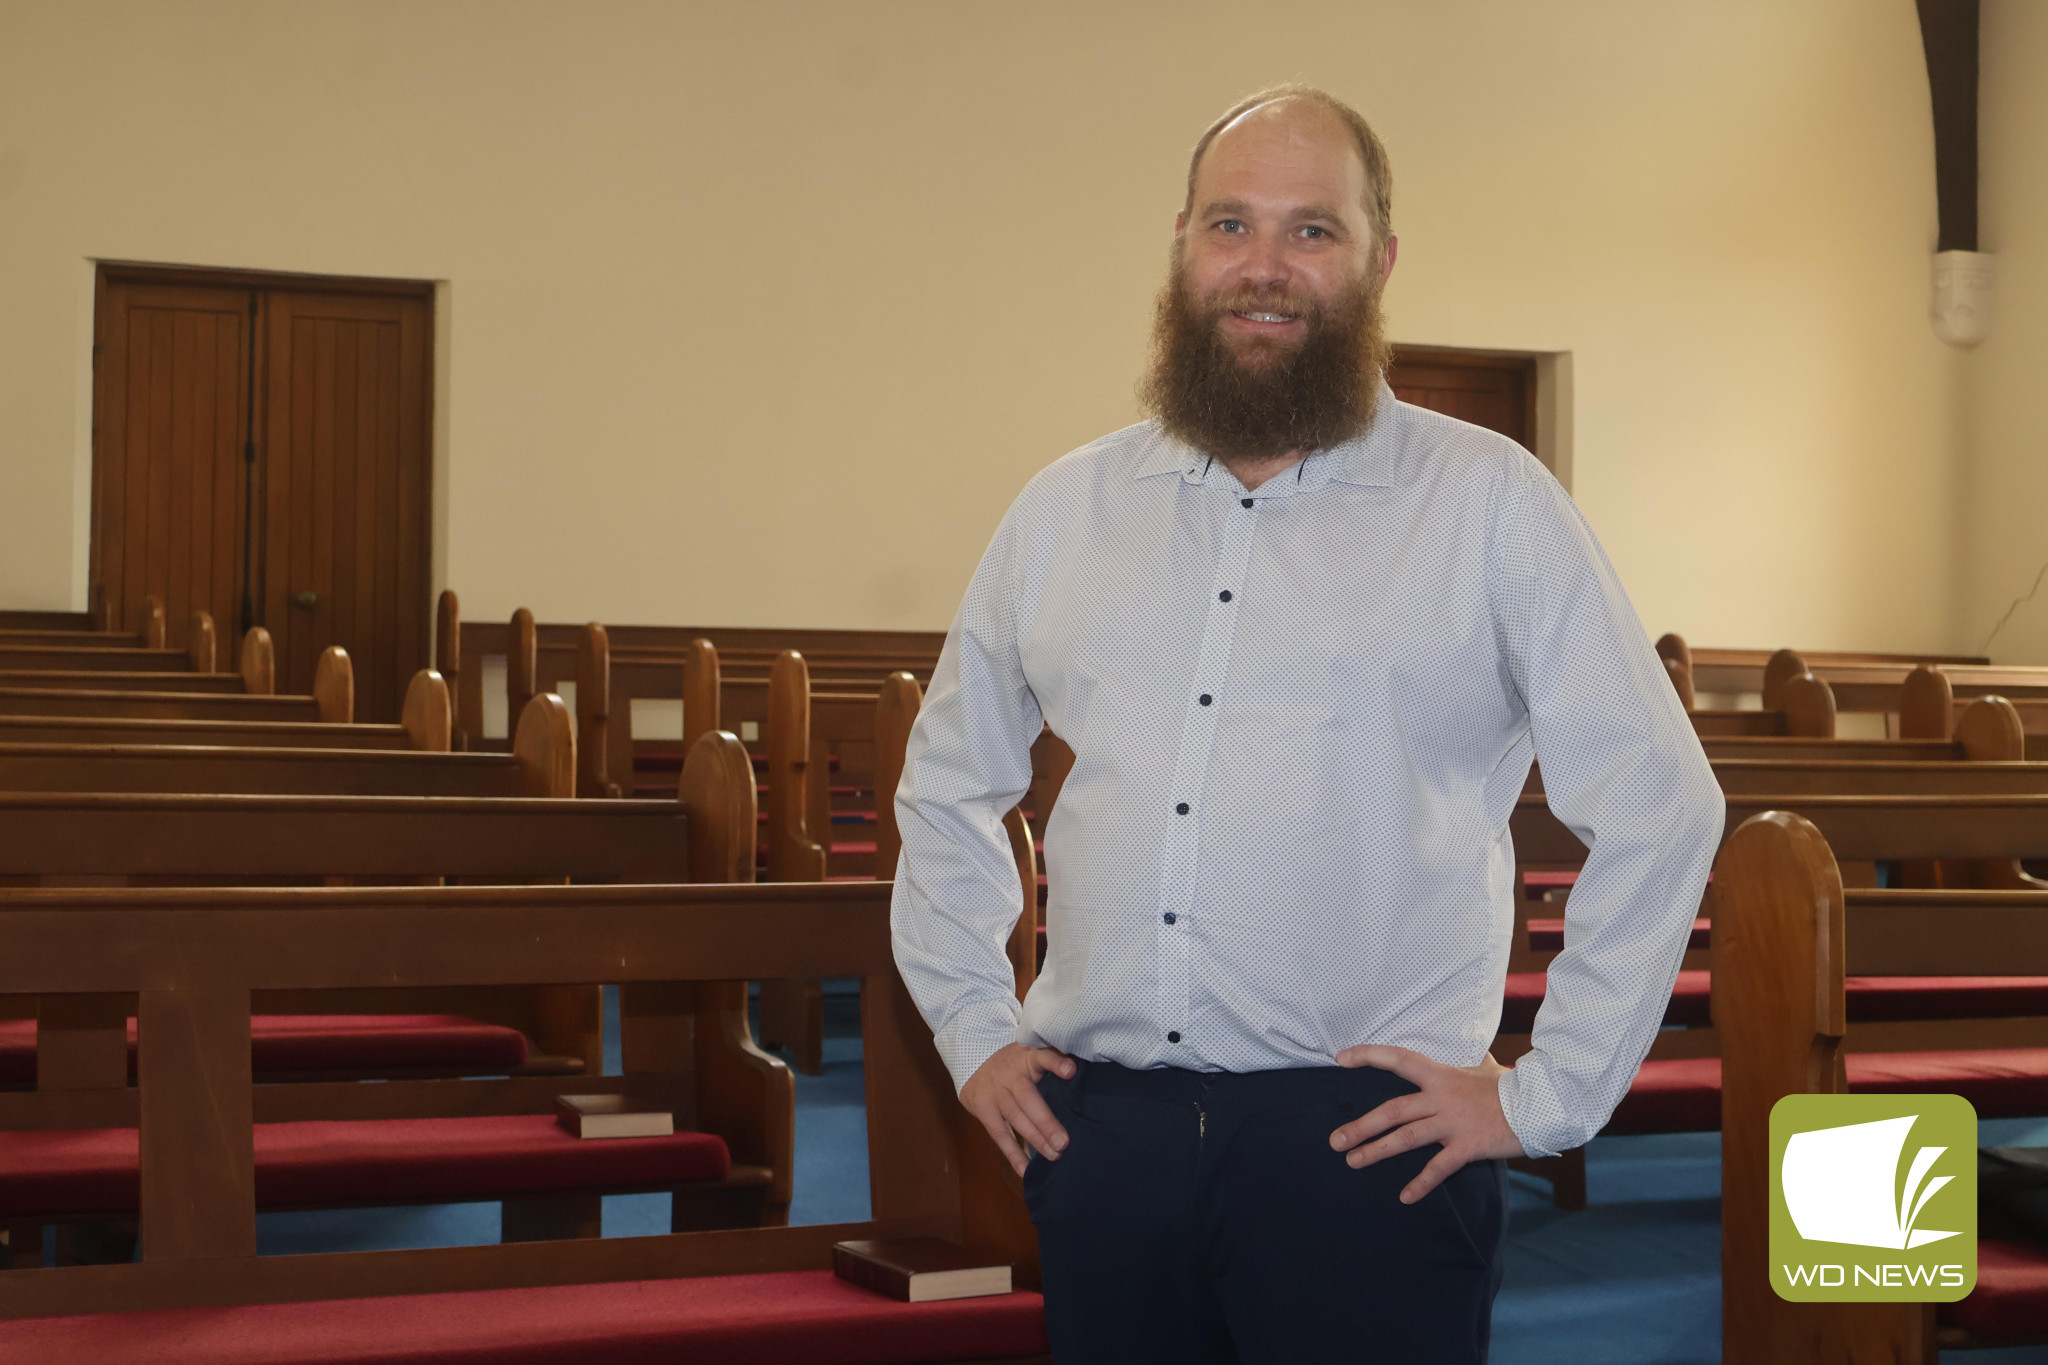 Farewell: Reverend Damian Meeuwissen held his final service in the region over the weekend, after leading ministry in the Presbyterian churches of Terang, Noorat and Camperdown for the past five years.